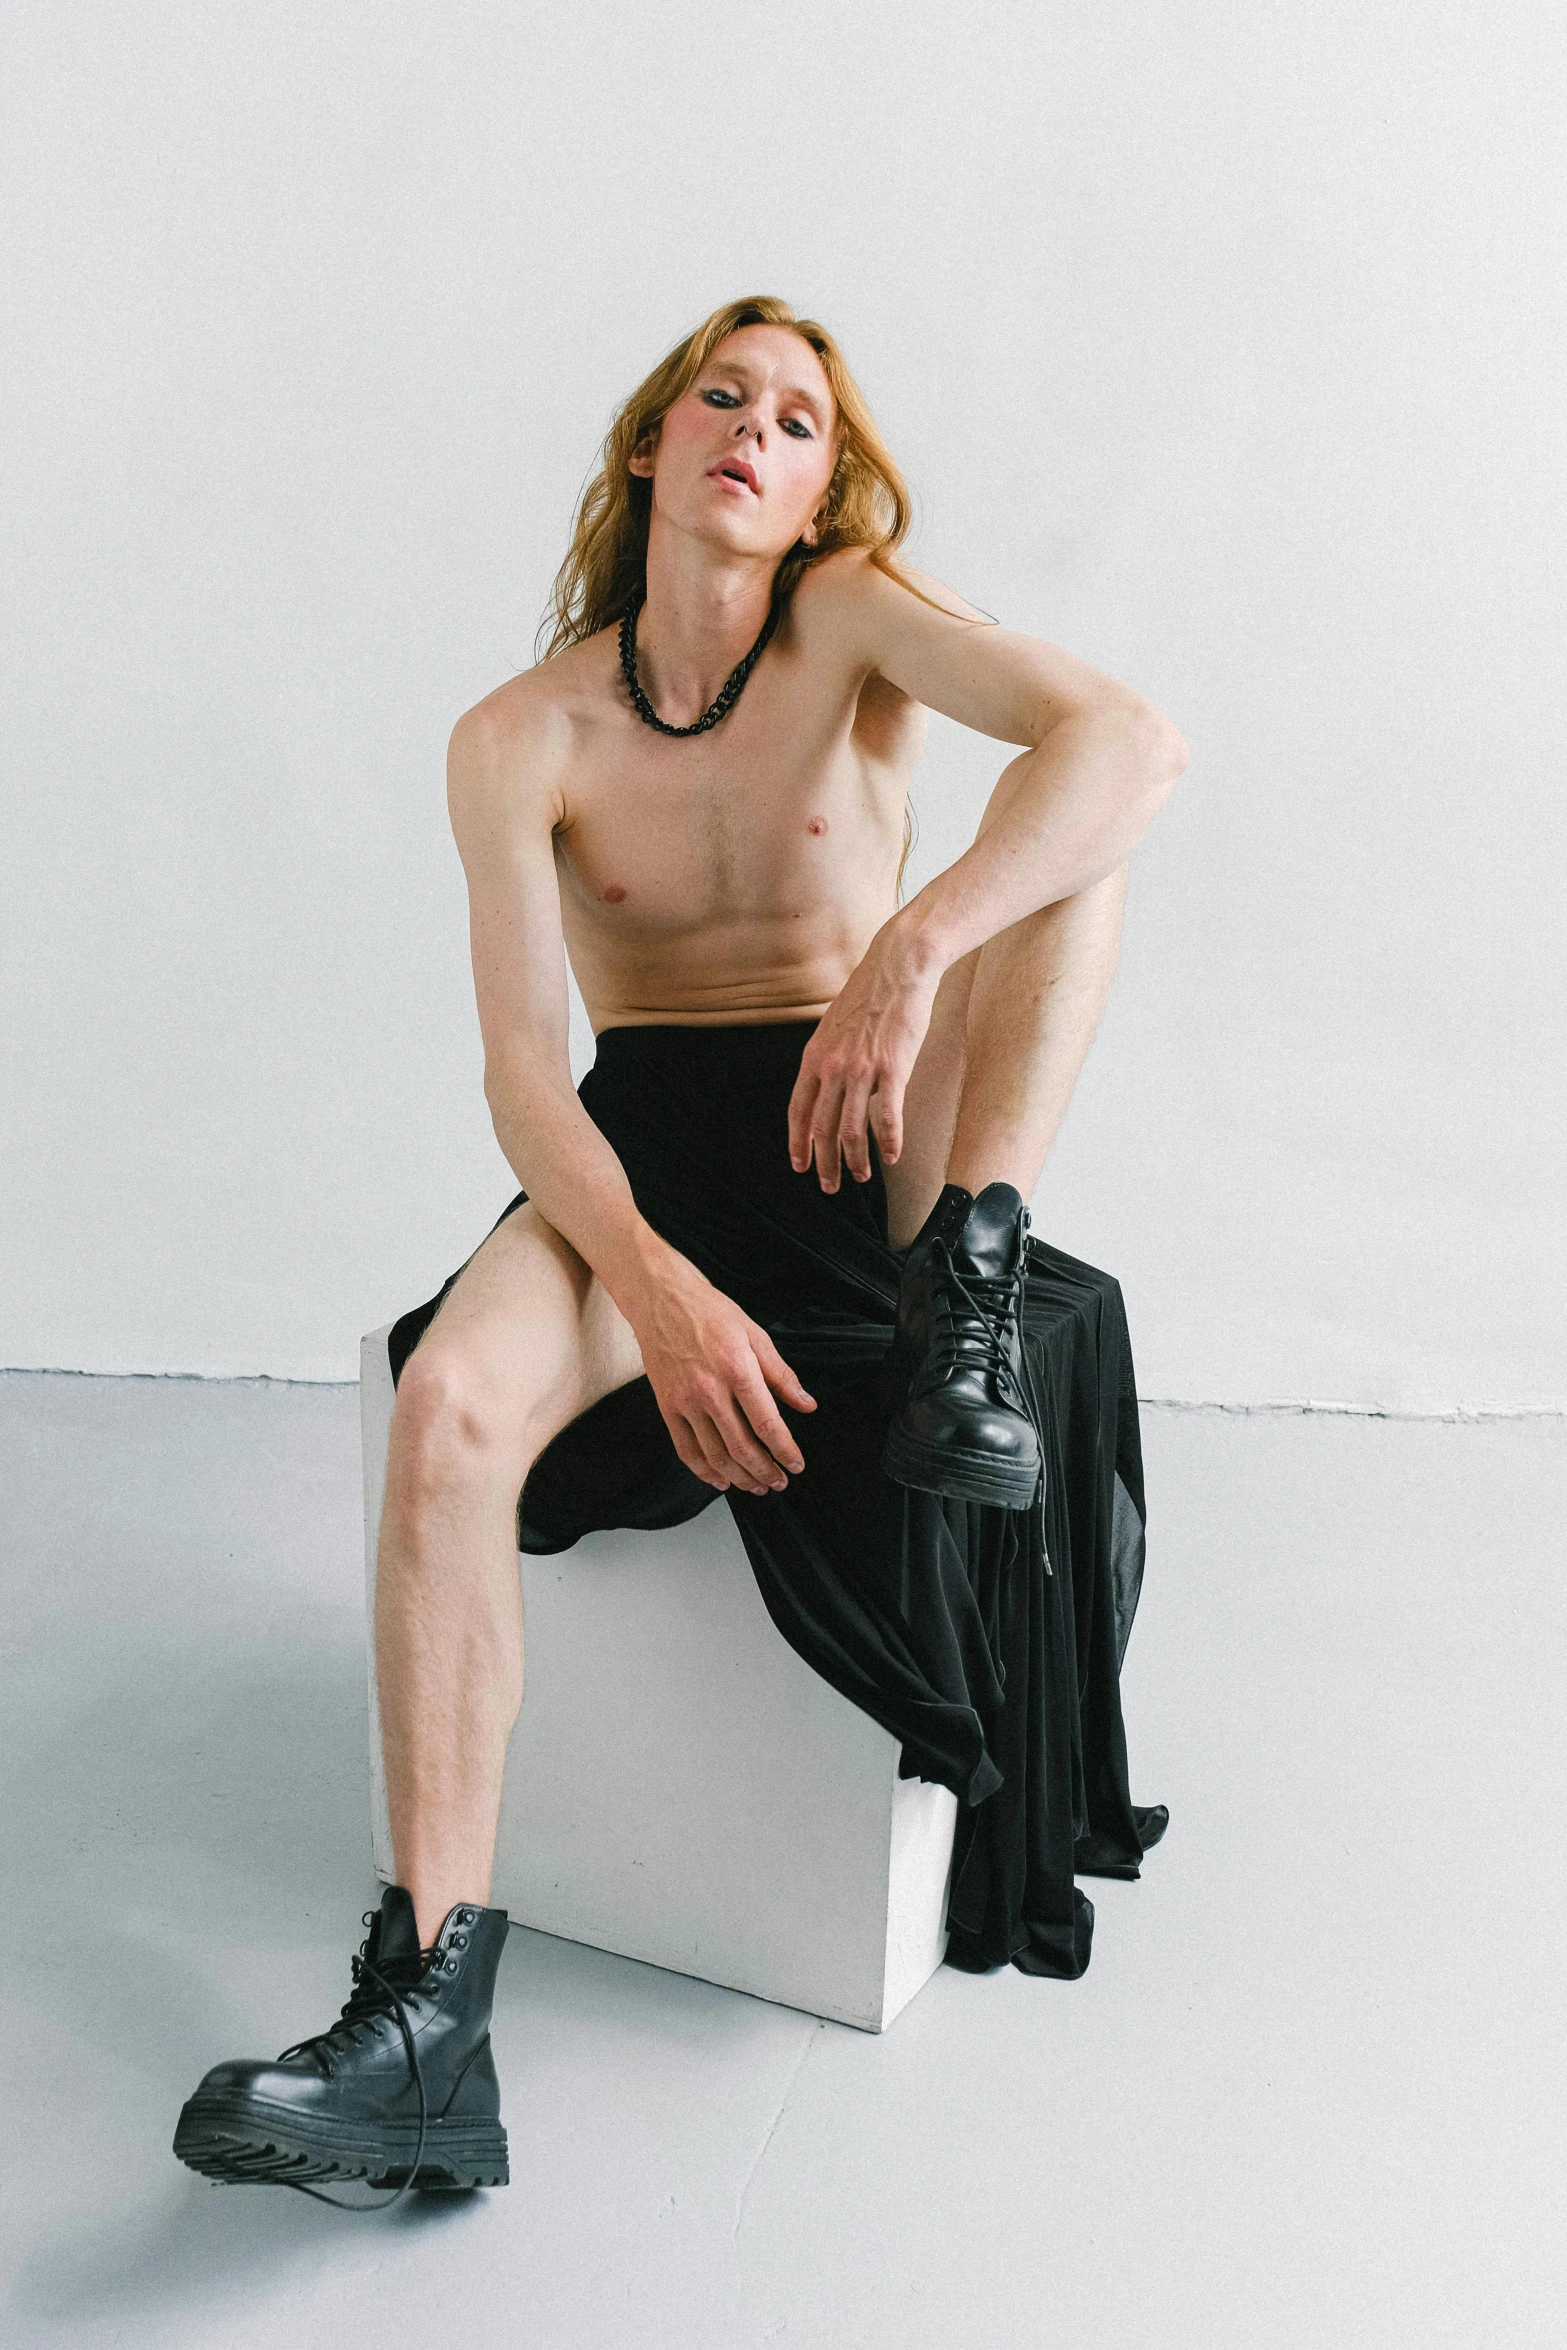 a shirtless man sitting on top of a white box, an album cover, inspired by Nan Goldin, renaissance, joe biden as a transgender woman, jamie campbell bower, lois greenfield, uncropped